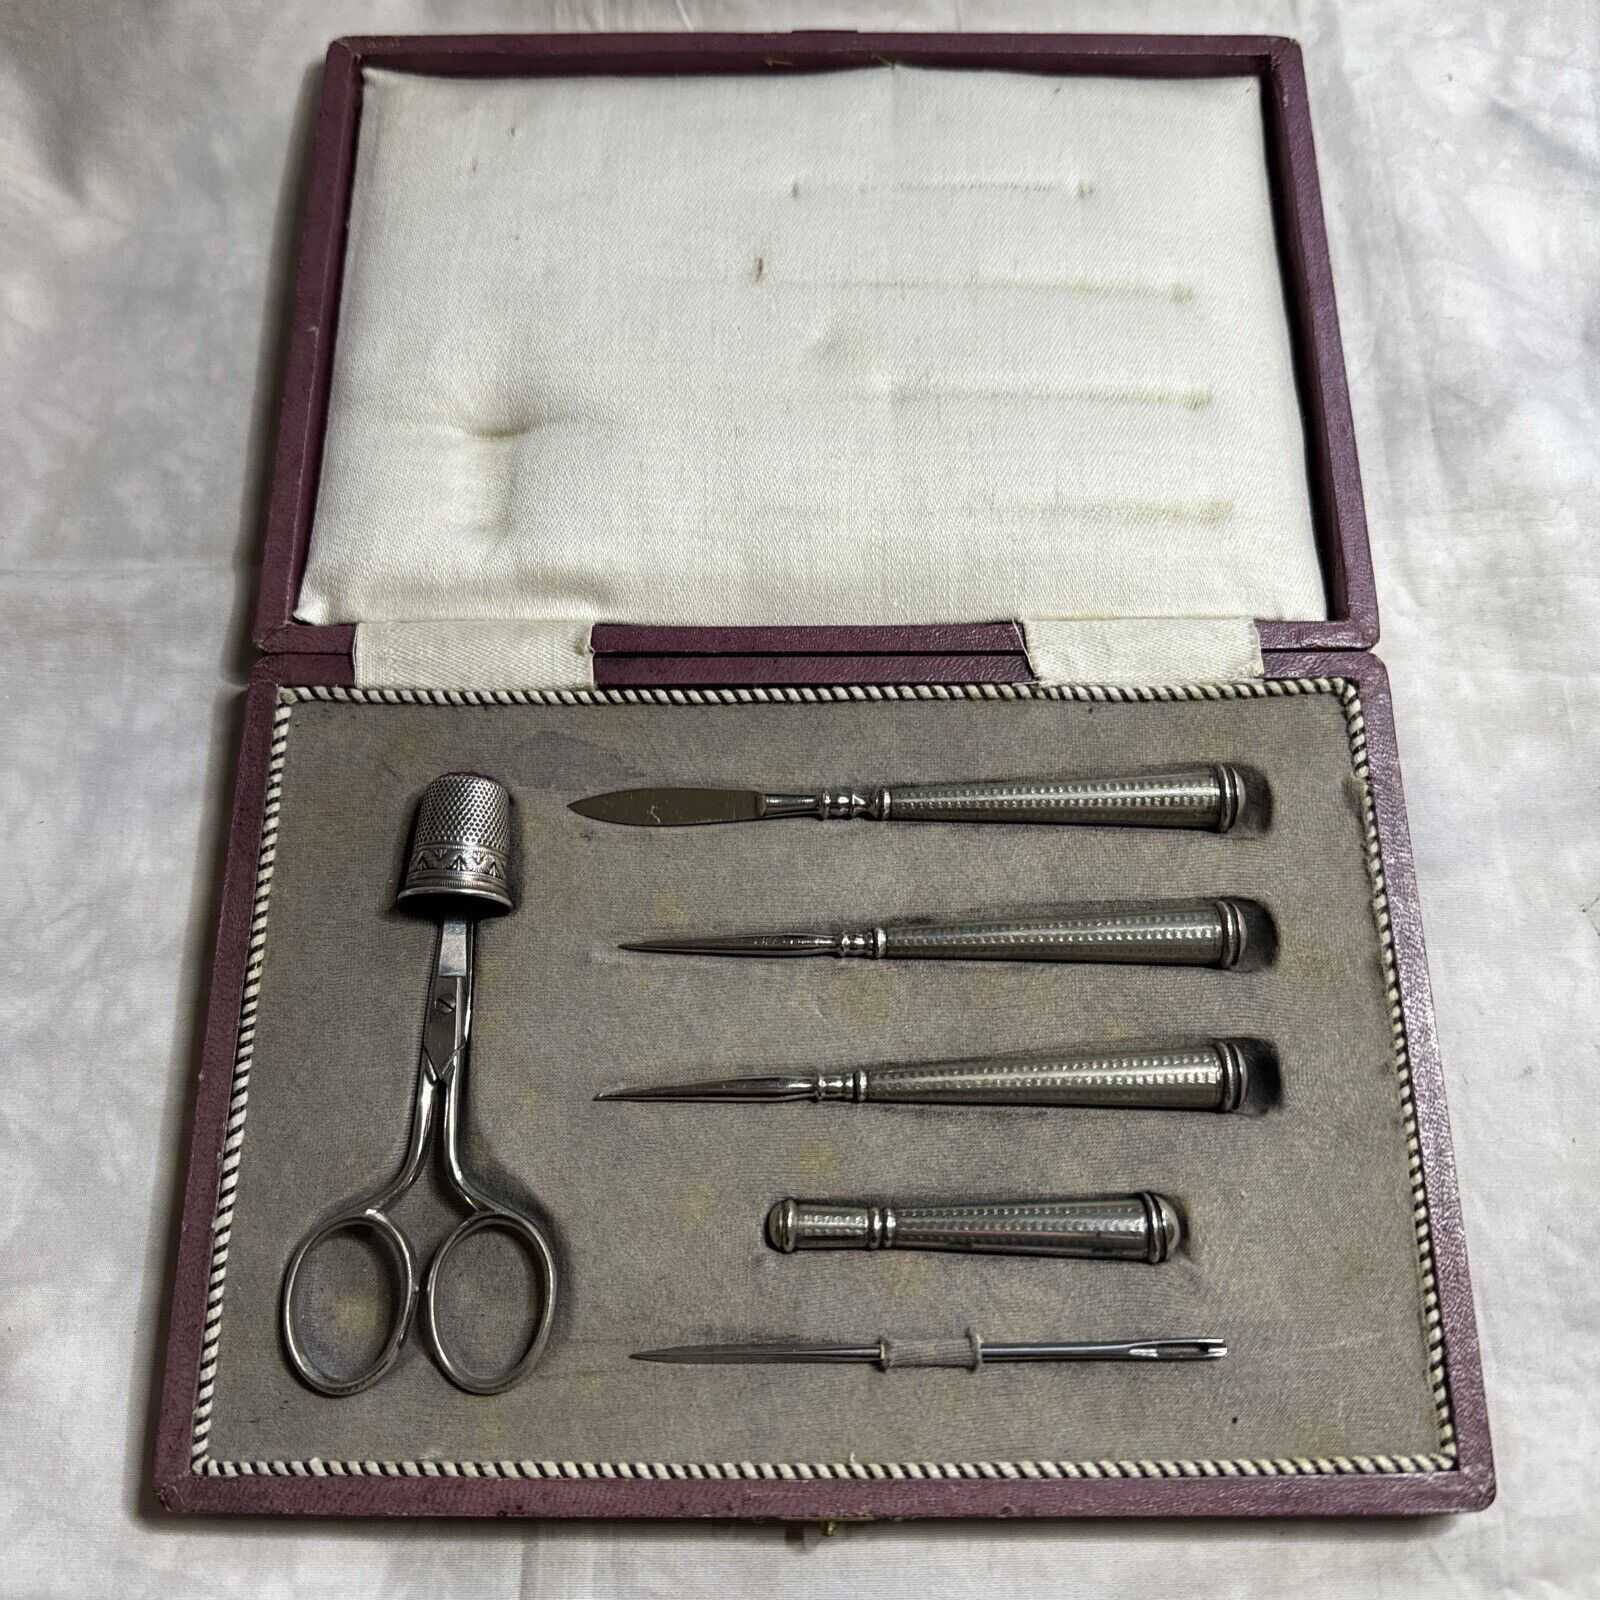 Antique unmarked Silver Embroidery/Sewing Set - probably German c. 1880/90s